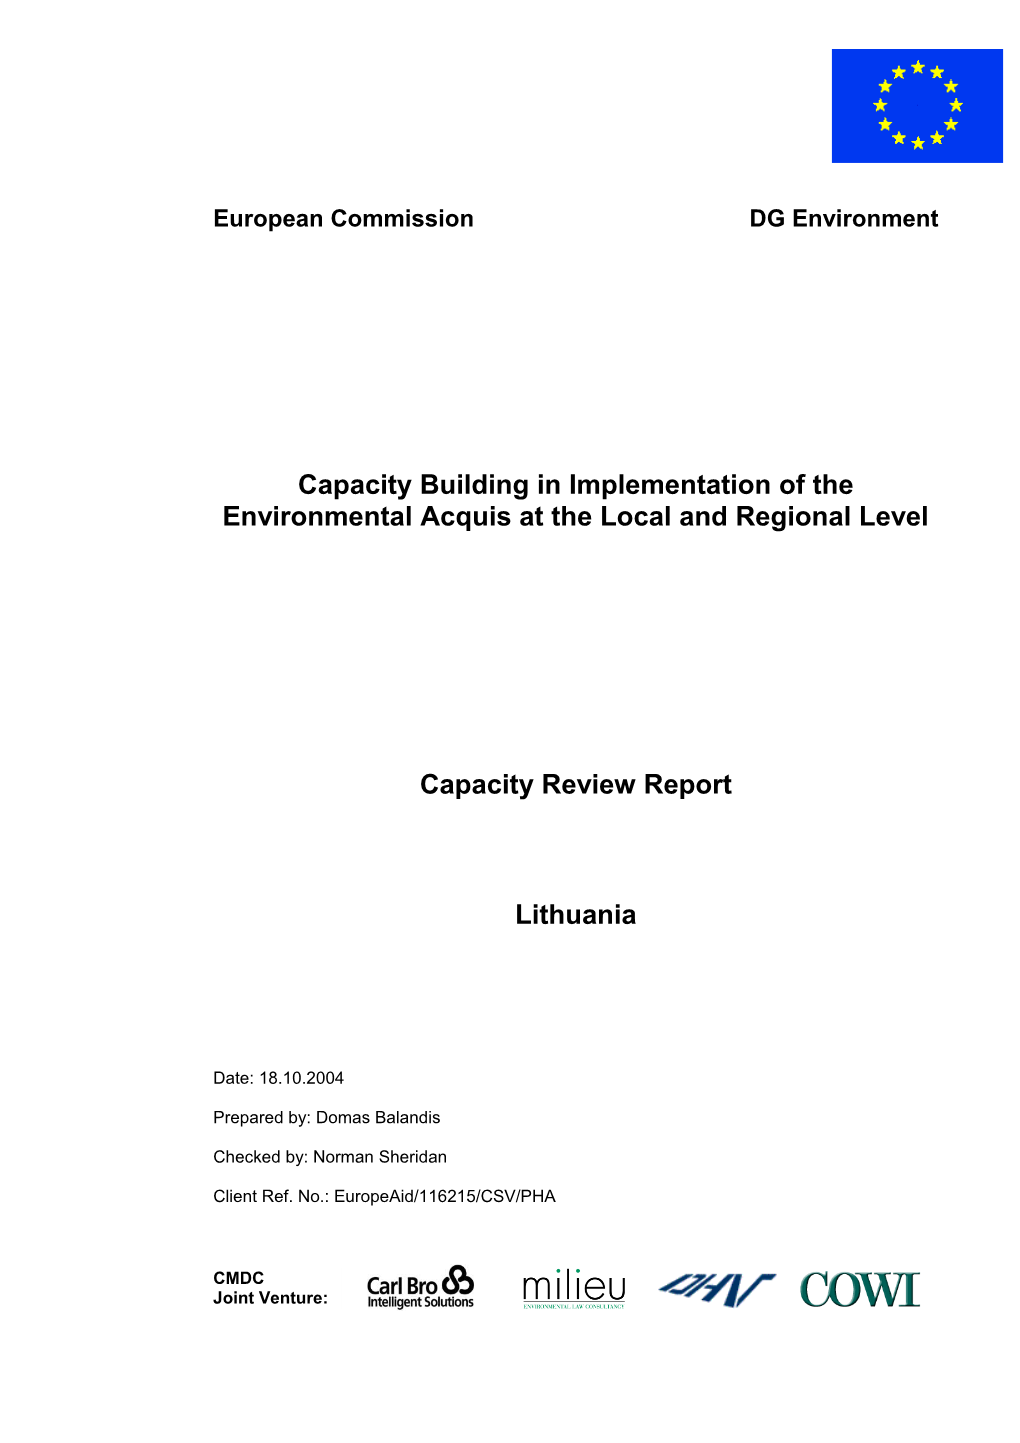 European Commission / DG Environment Capacity Building in Implementation of the Environmental